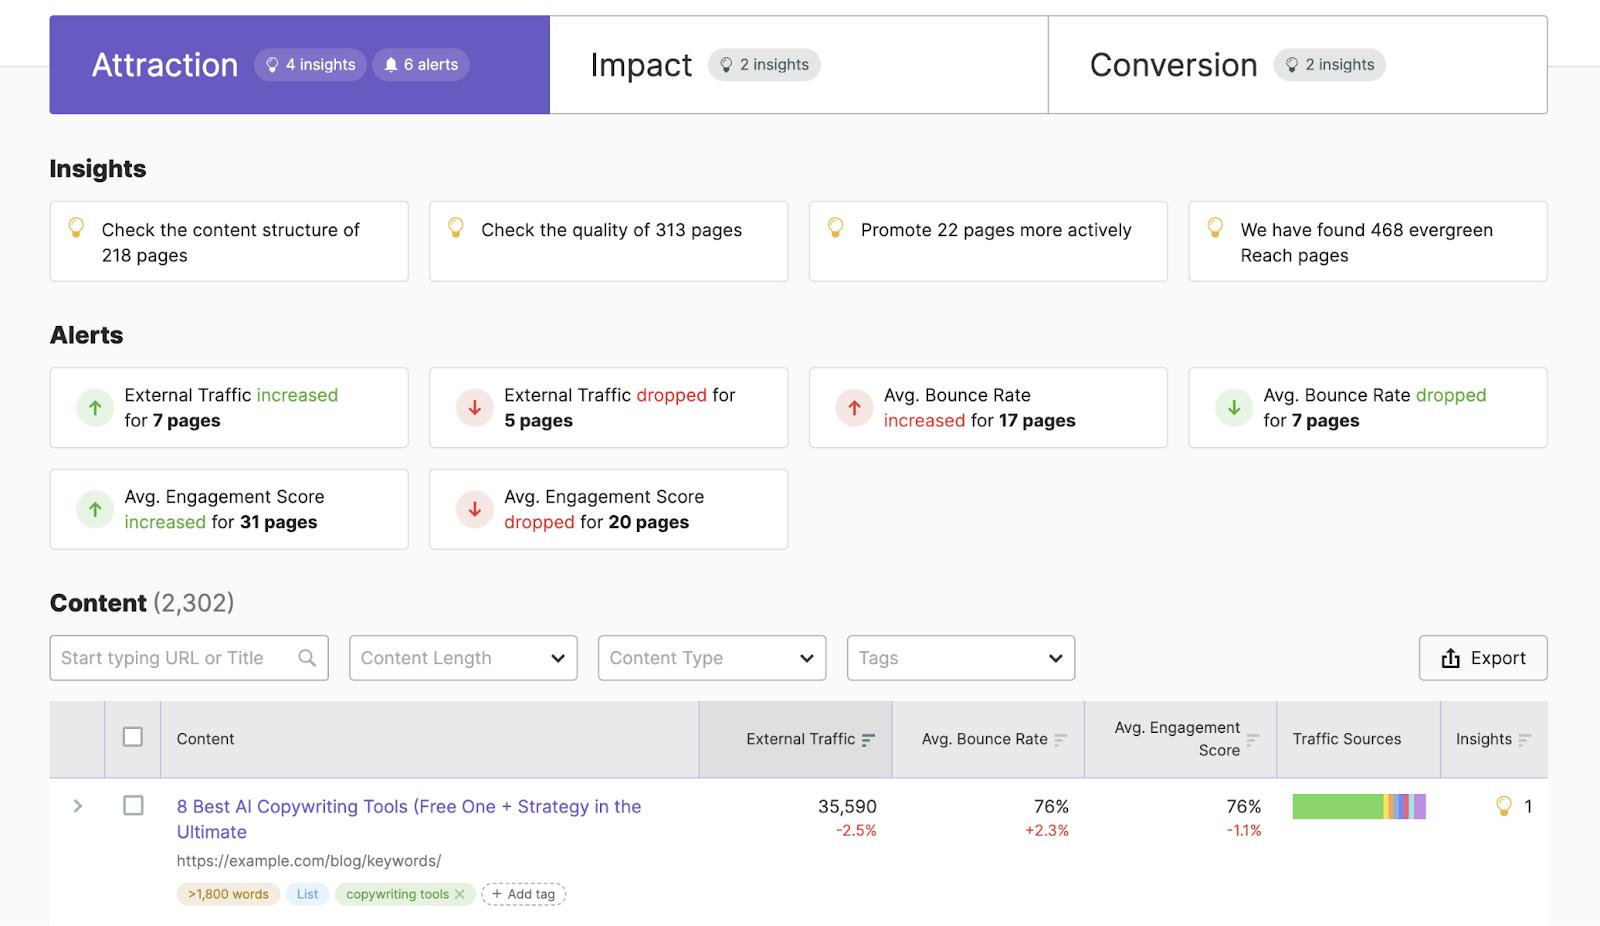 "Attraction" dashboard in ImpactHero showing insights, alerts, and content